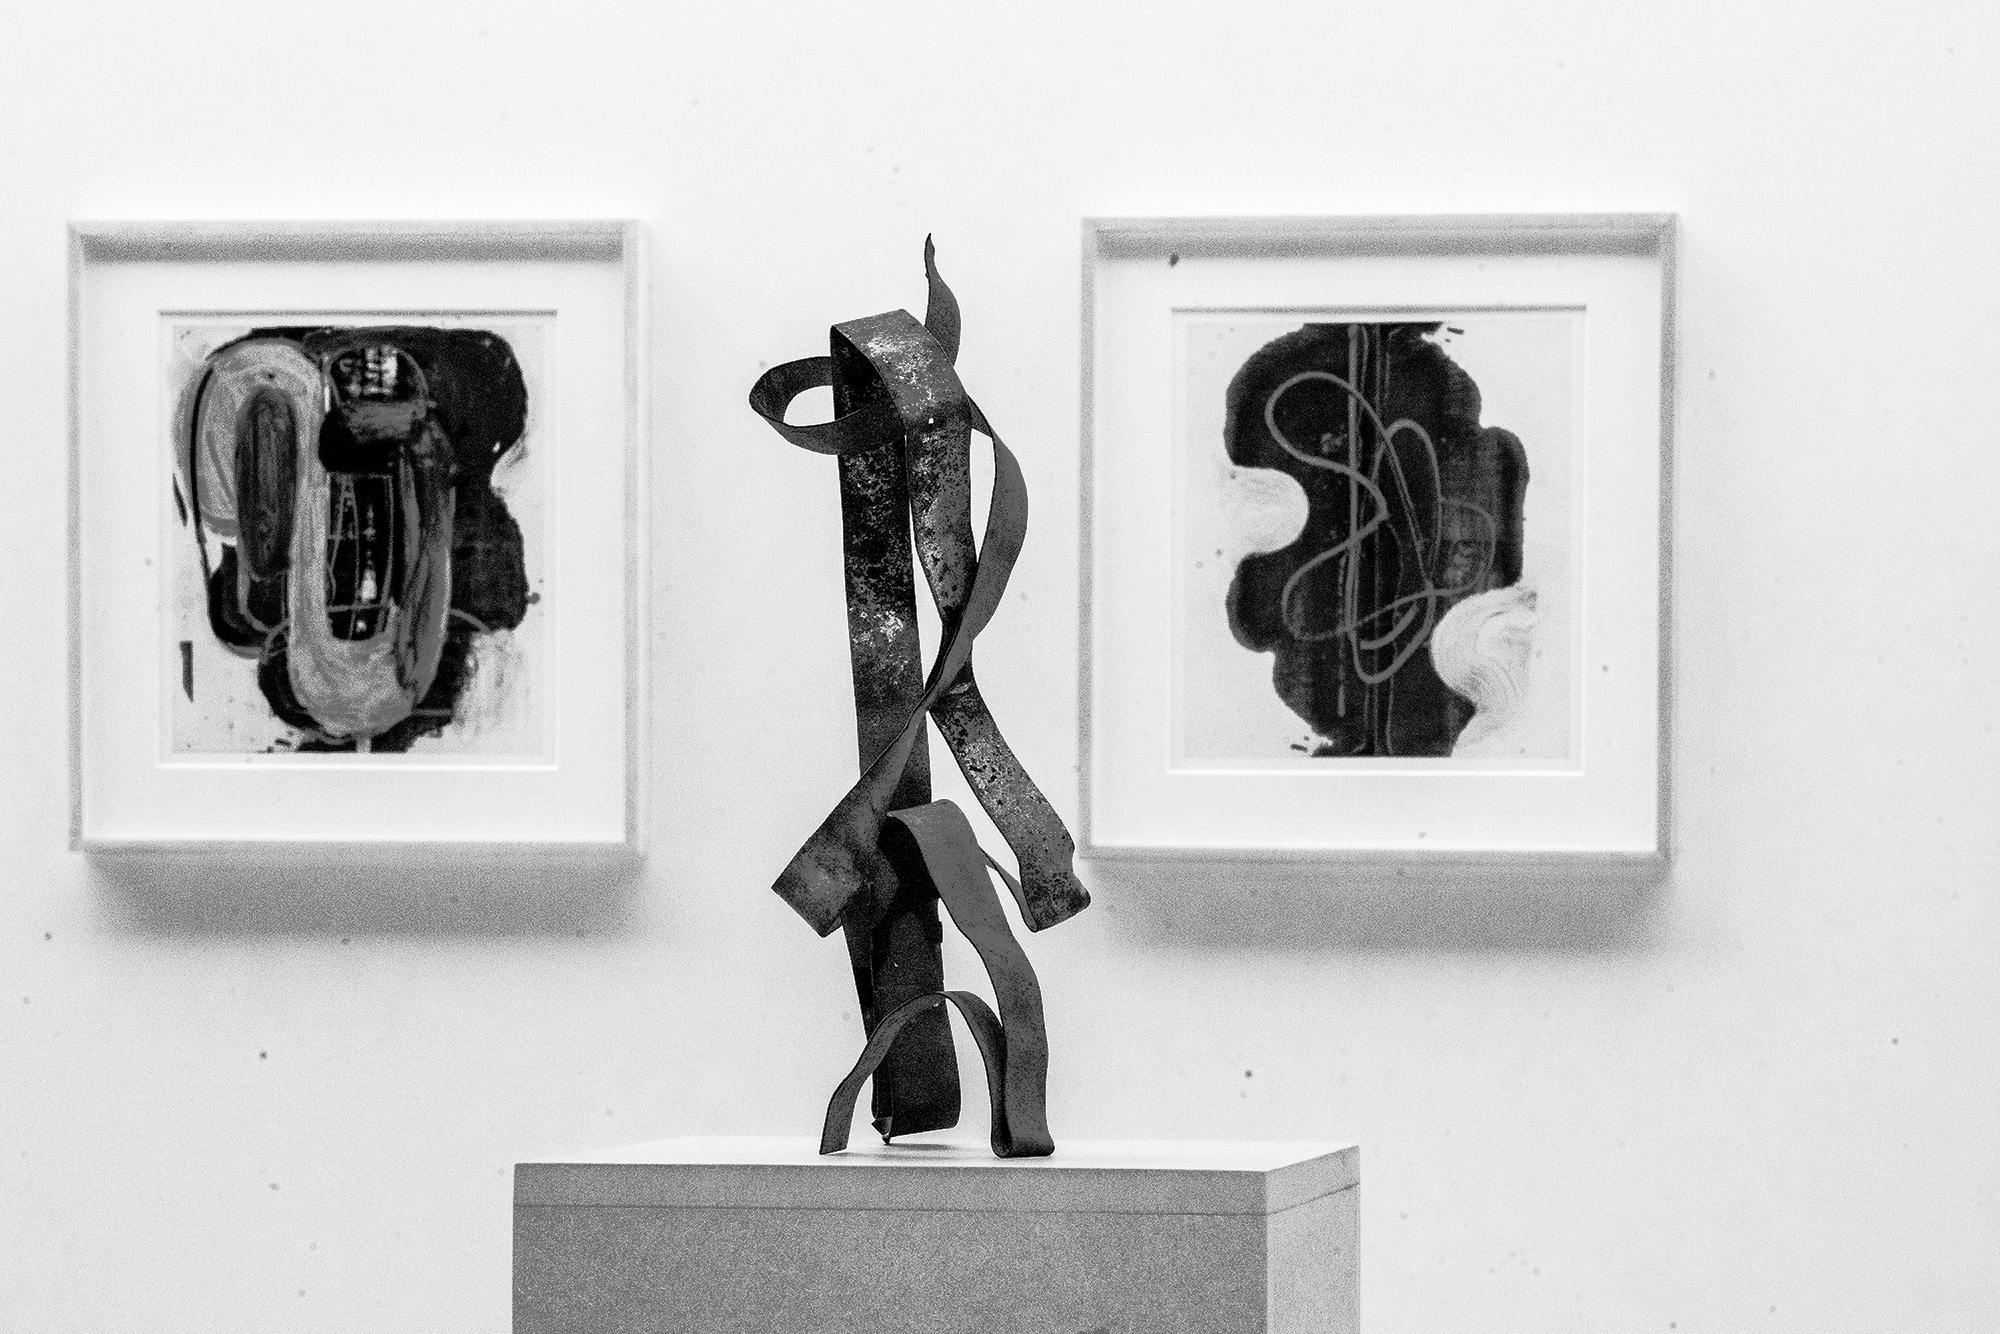 A black and white photograph documents three works of art. Two small framed abstract works on paper hang on the wall behind a small sculpture, consisting of bent metal, stands on a pedestal.